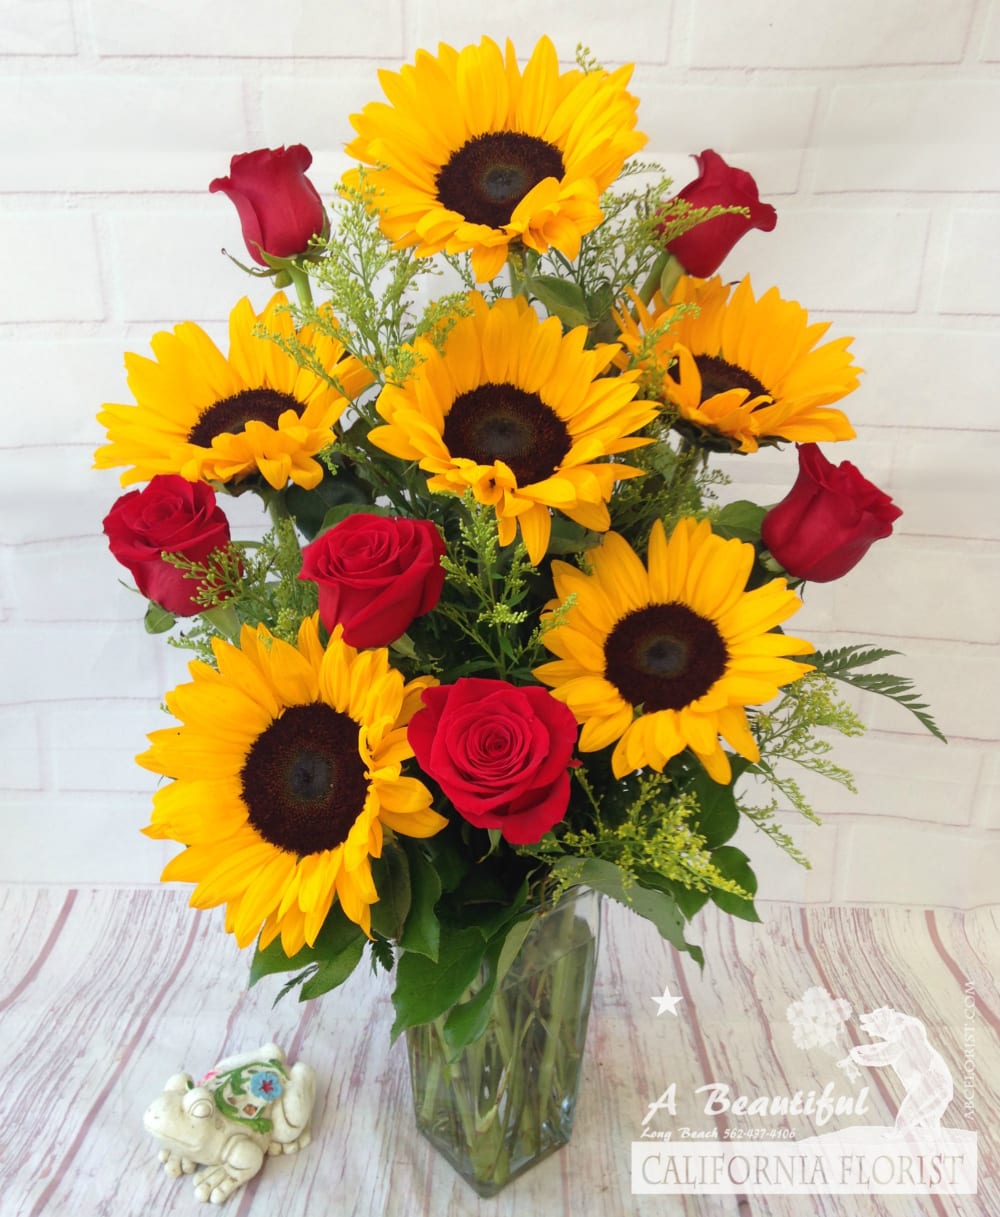 Yellow and Red in Long Beach, CA | A Beautiful California Florist